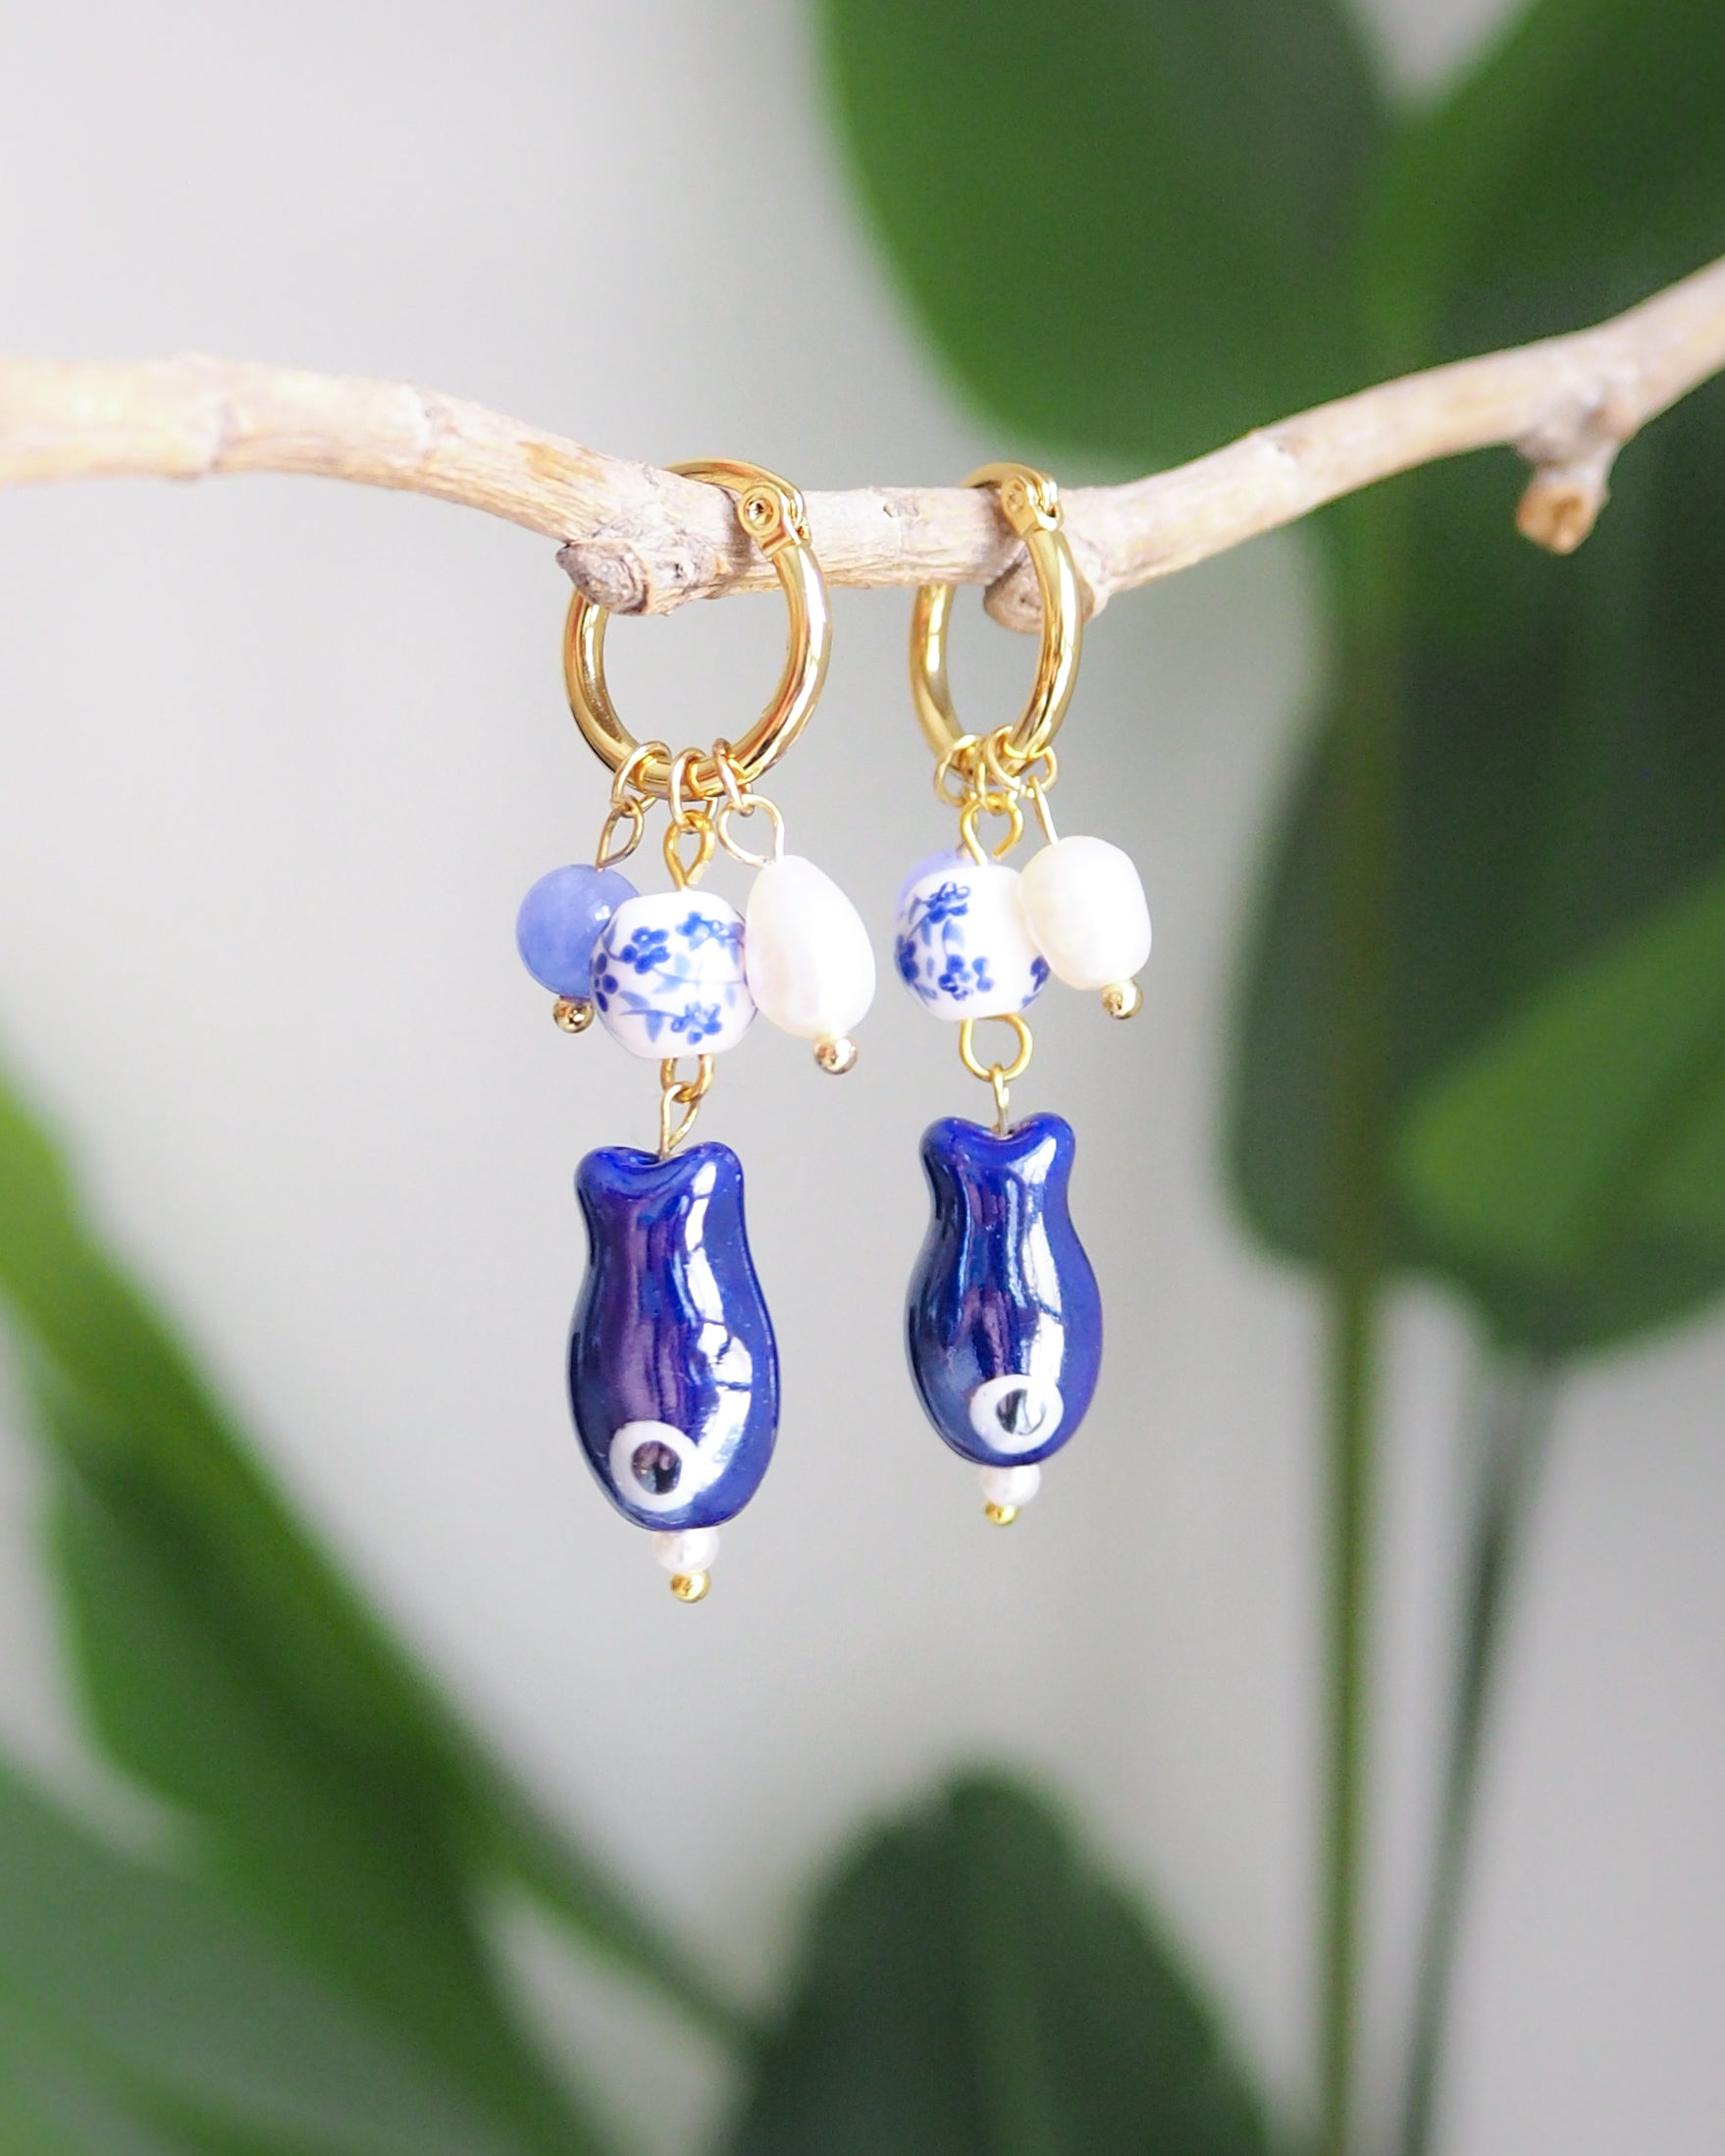 Gold Portuguese Sardine Fish Azulejo Tile Earrings with Gemstones and Freshwater Pearls